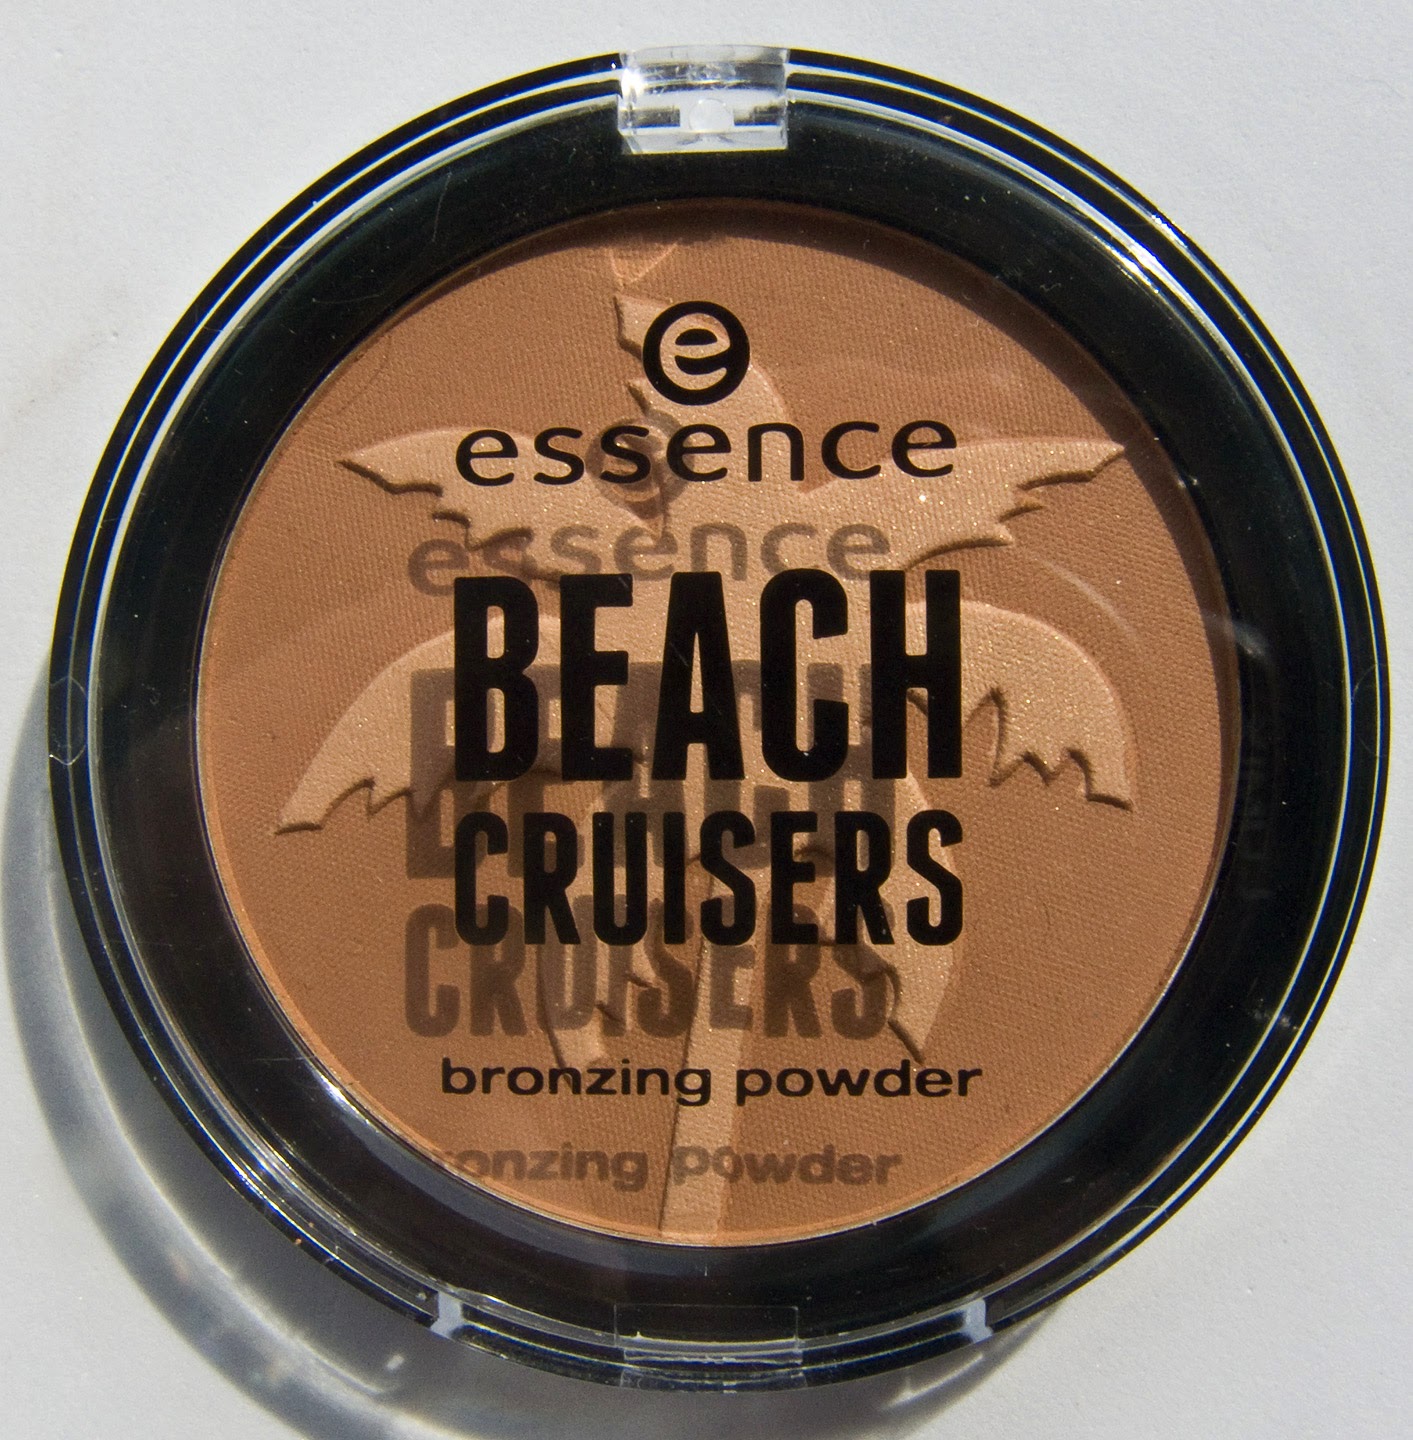 WARPAINT and Essence Beach Cruisers Collection: Review